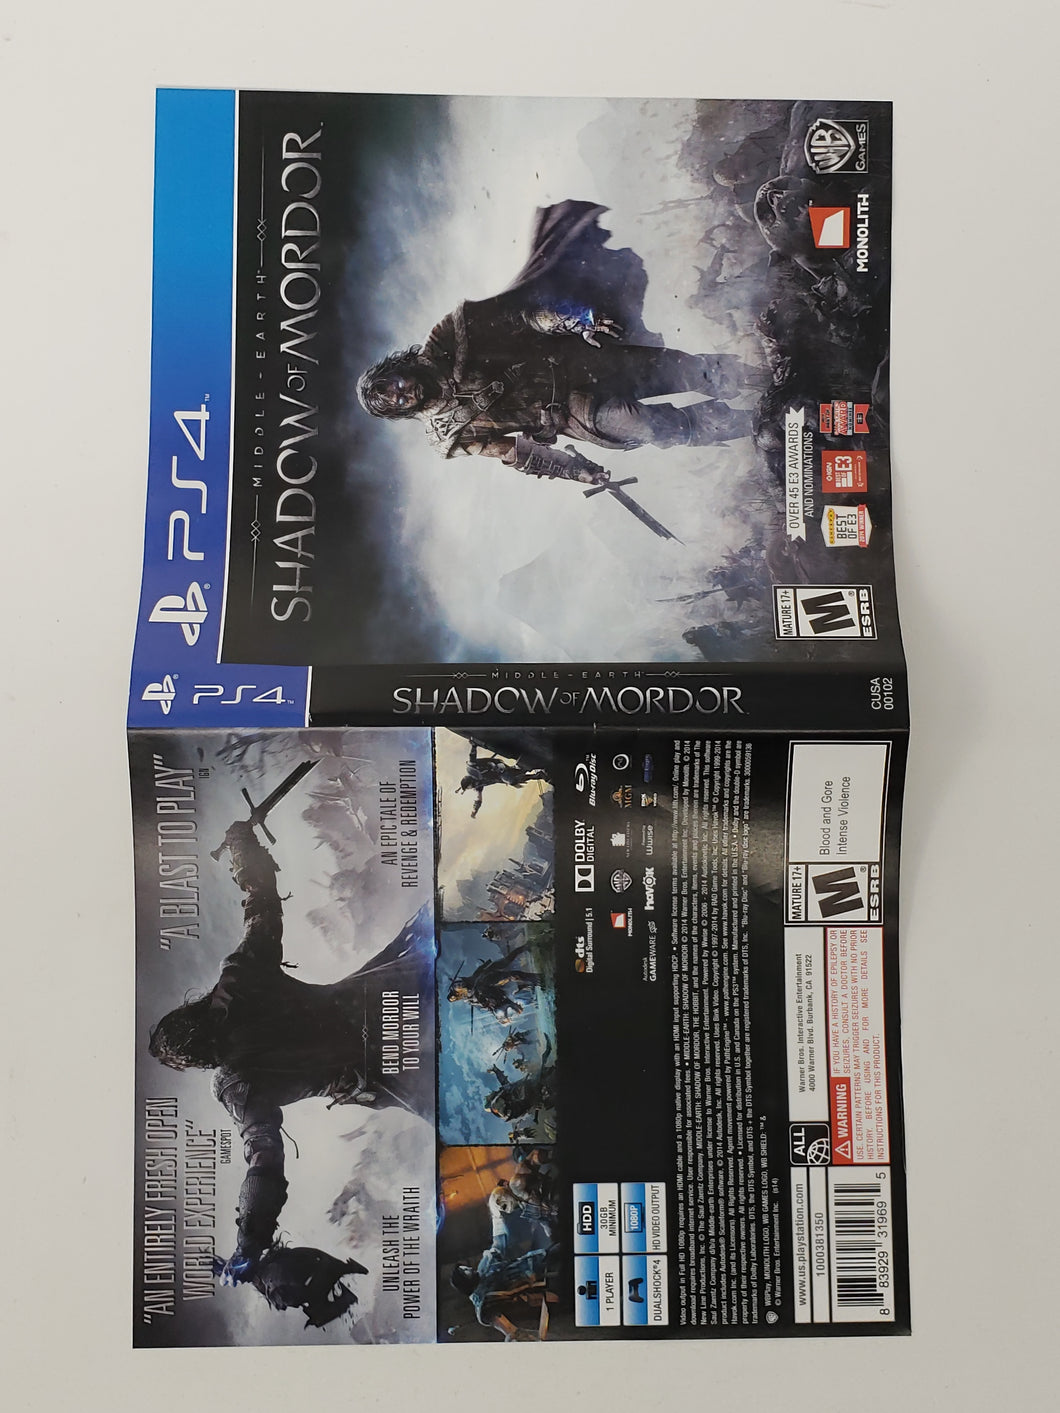 Middle Earth - Shadow of Mordor [Cover art] - Sony Playstation 4 | PS4